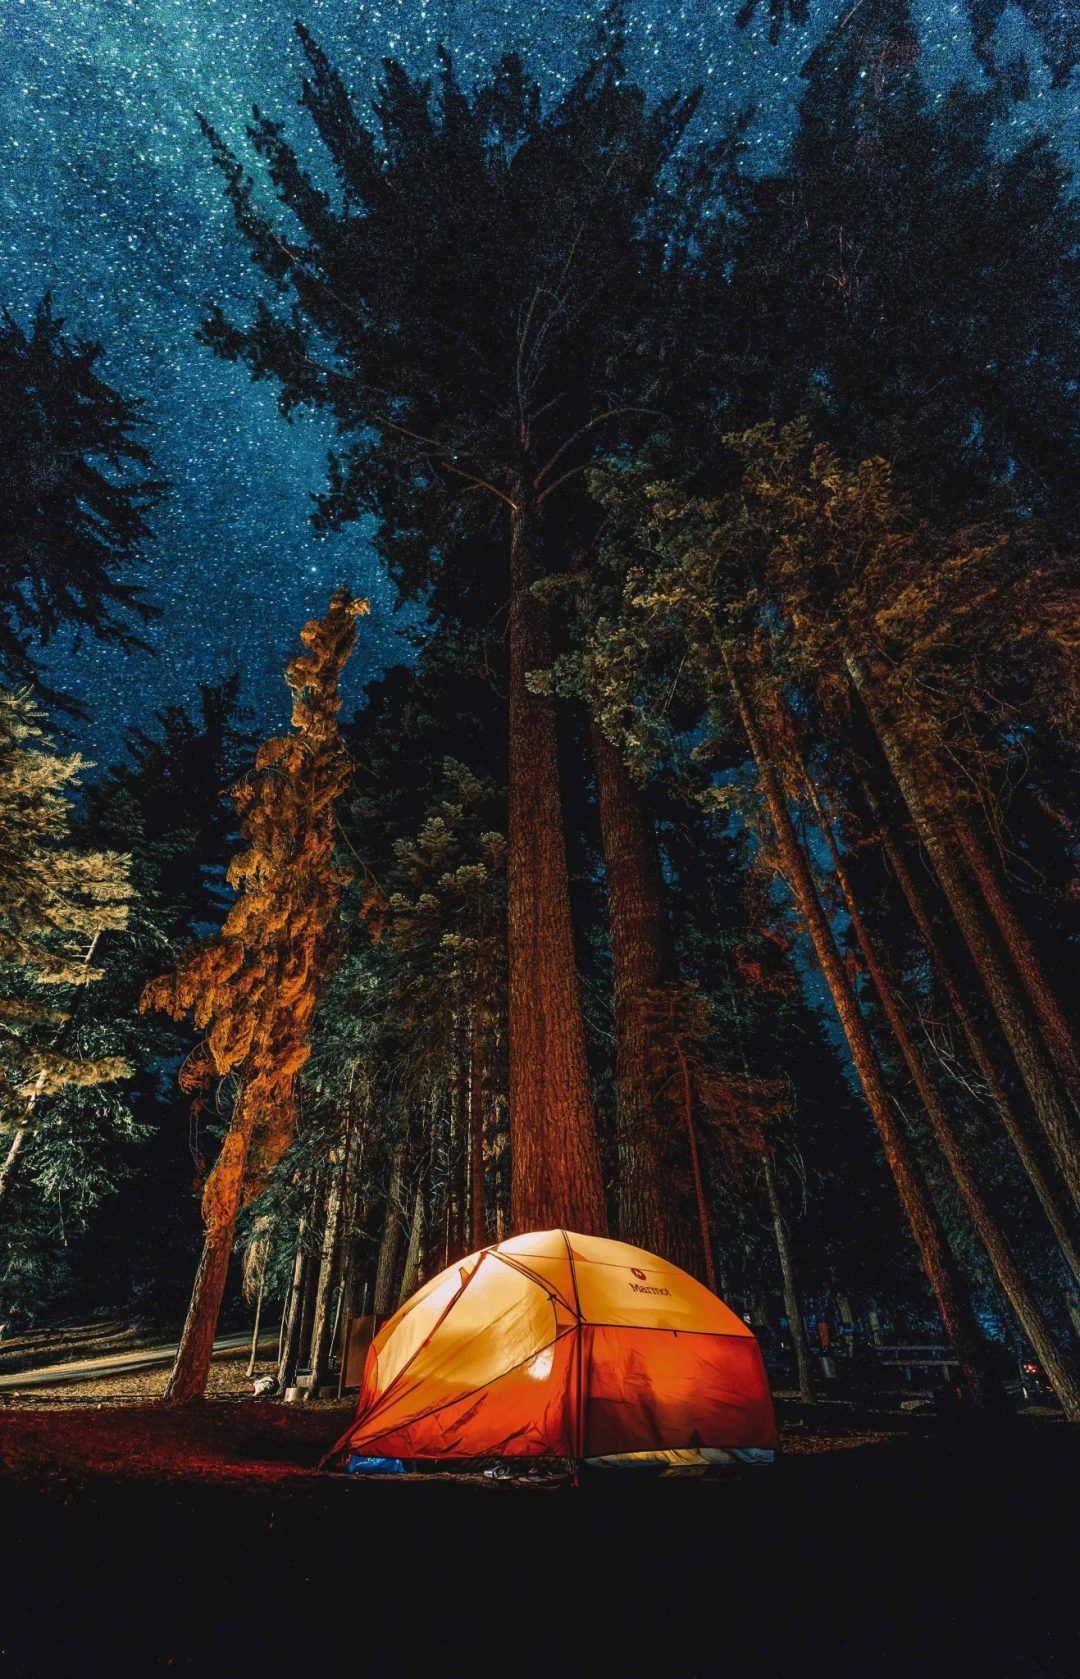 An orange, 6-person family camping tent illuminated with light amidst tall trees with a starry night sky above.